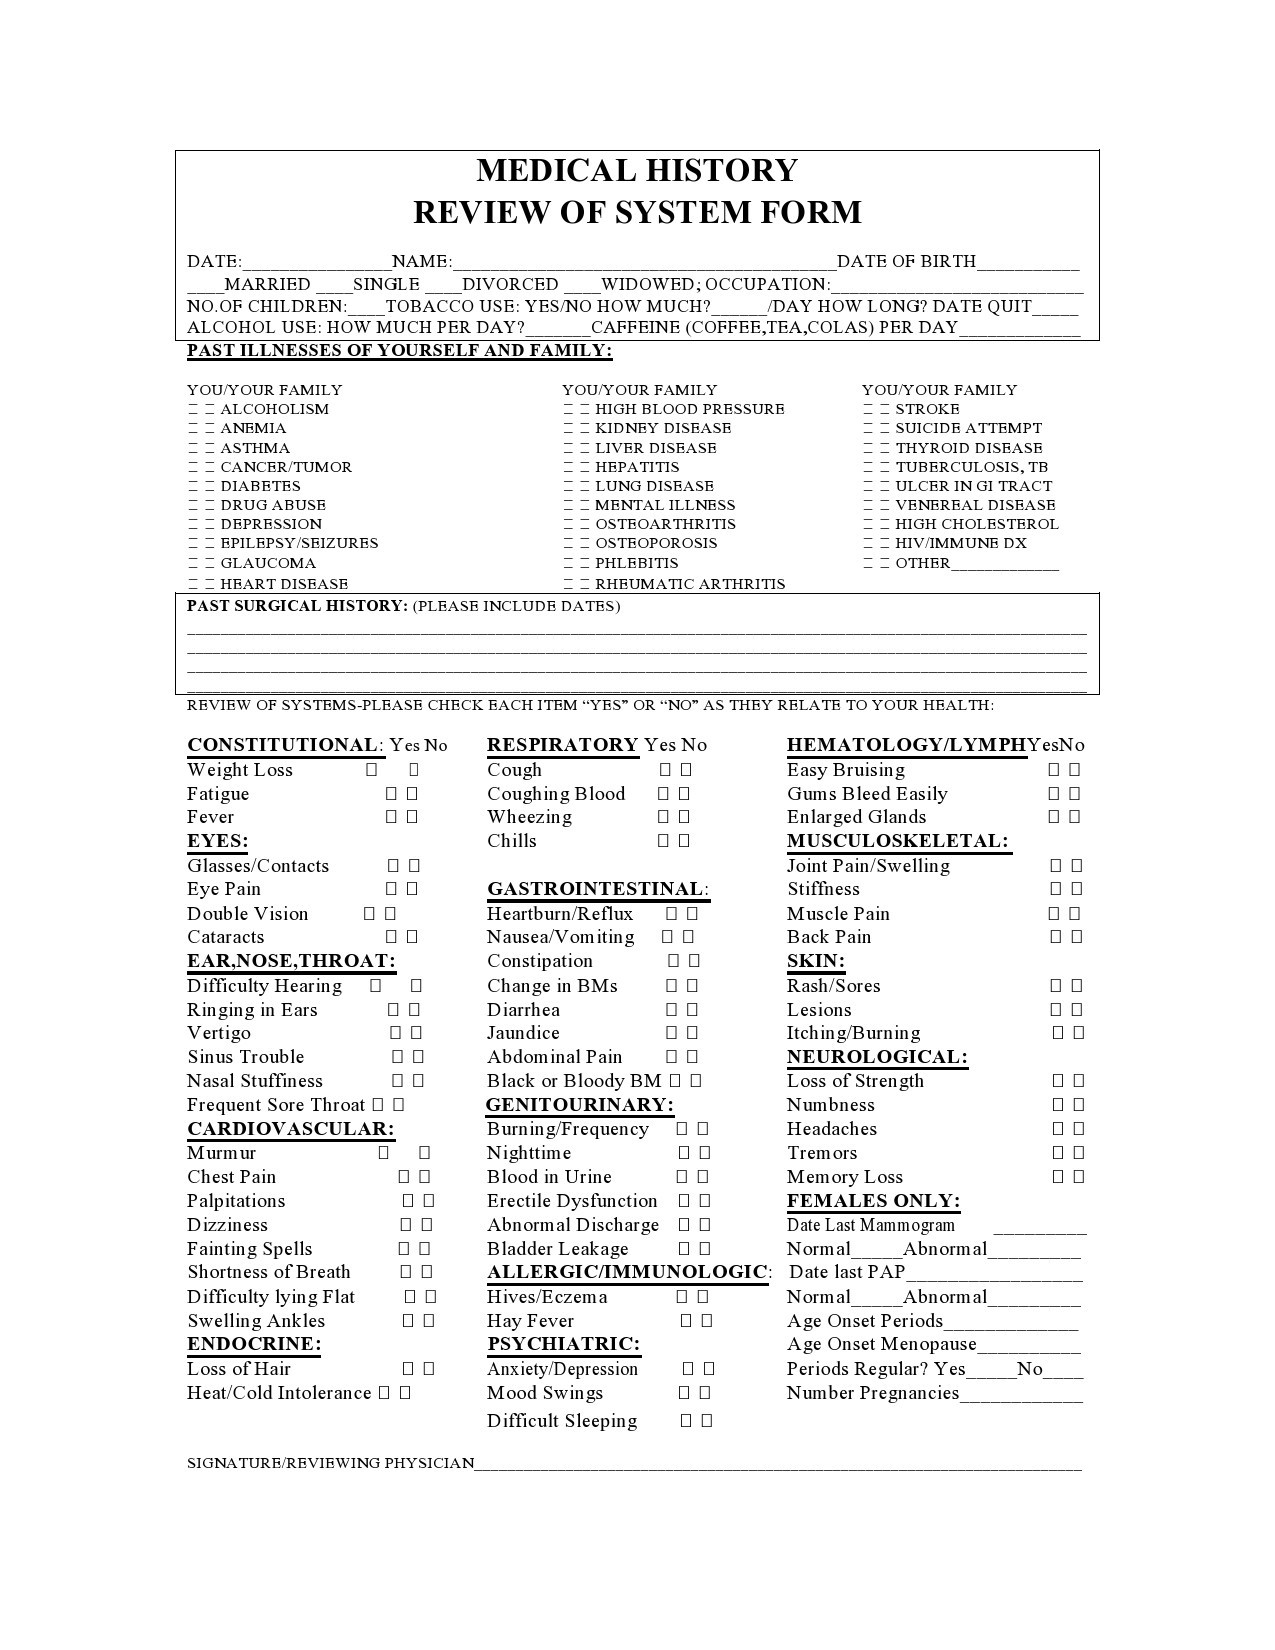 46 Free Review of Systems Templates ( Checklist) ᐅ TemplateLab